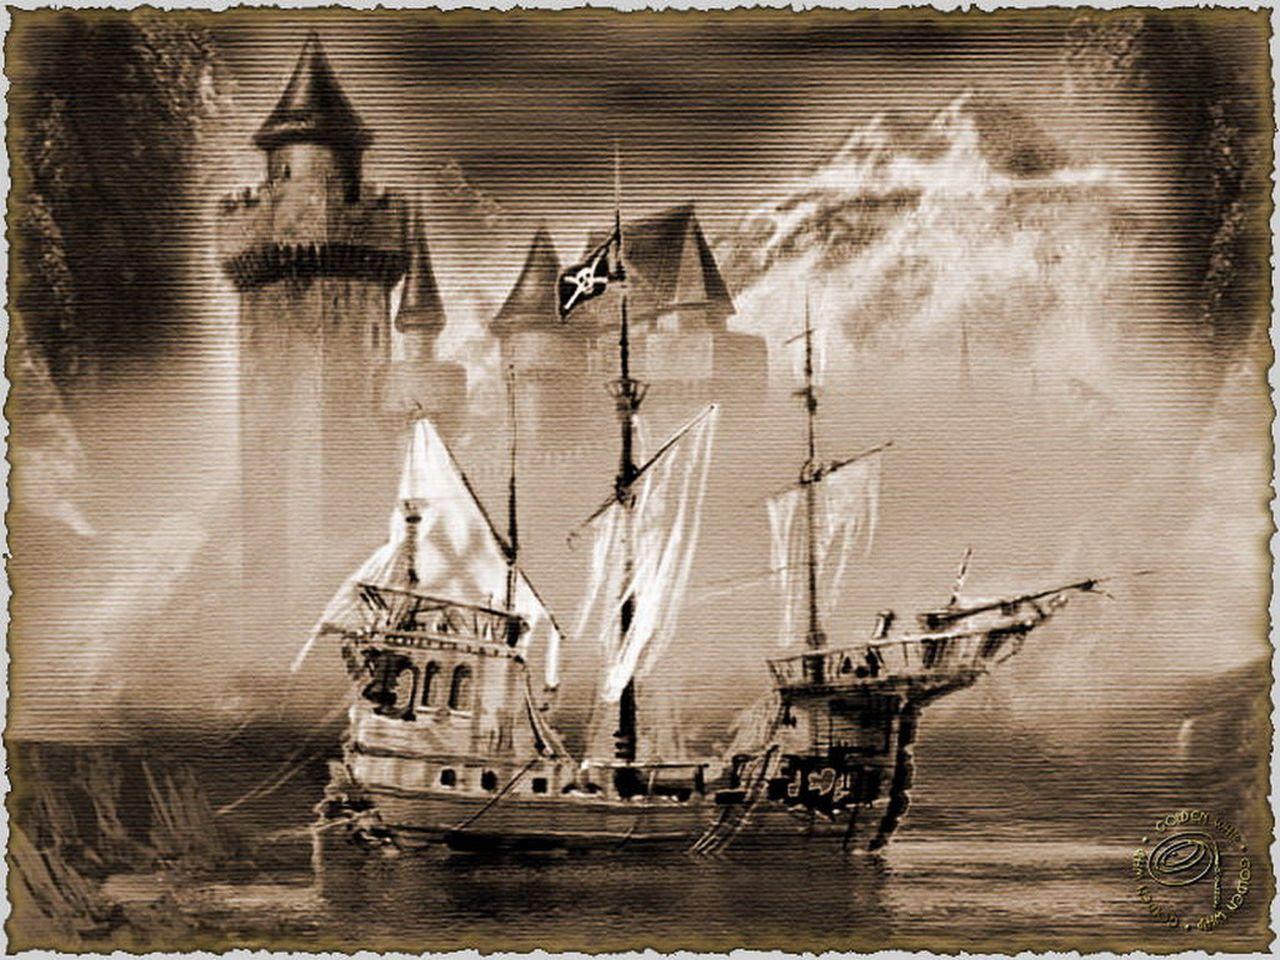 Download Ghostship The Second On CrystalXP.net